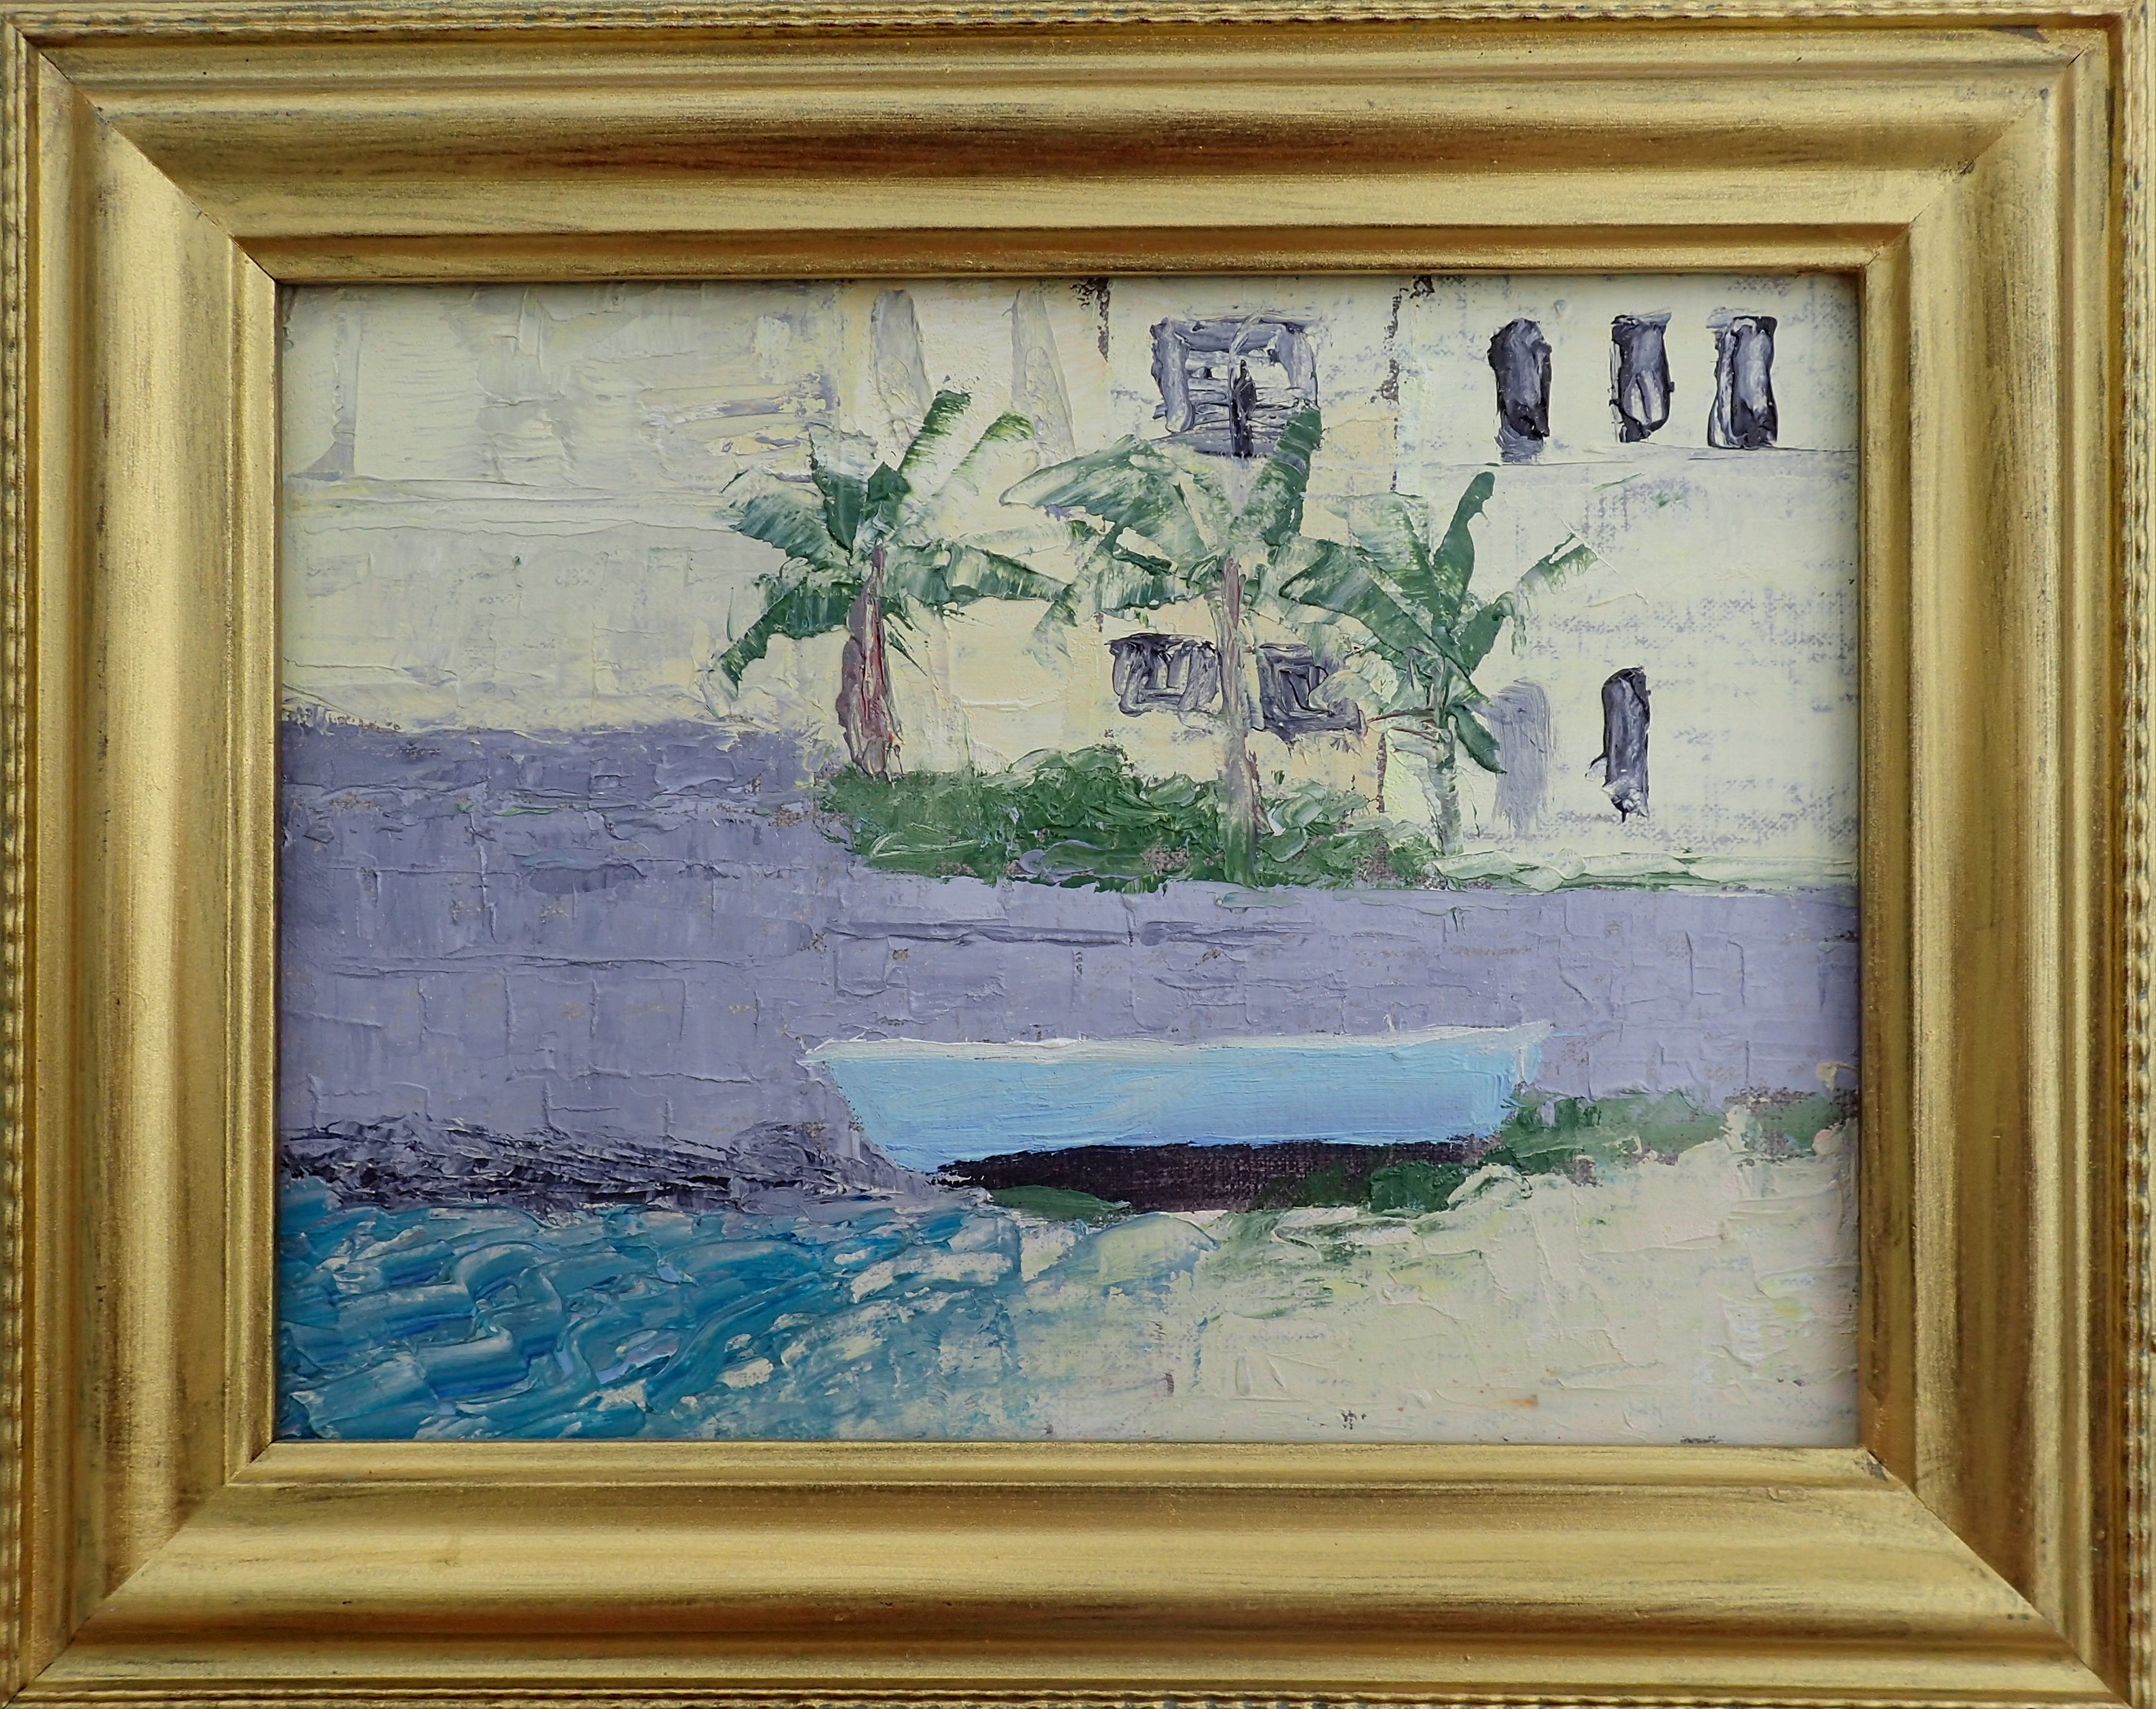 On Great Guana Cay upscale large homes are emerging post Dorian.  This beach at Grabbers on Fishers Bay shows the contrast of a washed up boat next to a huge home under construction.  Oil on Canvas 8x